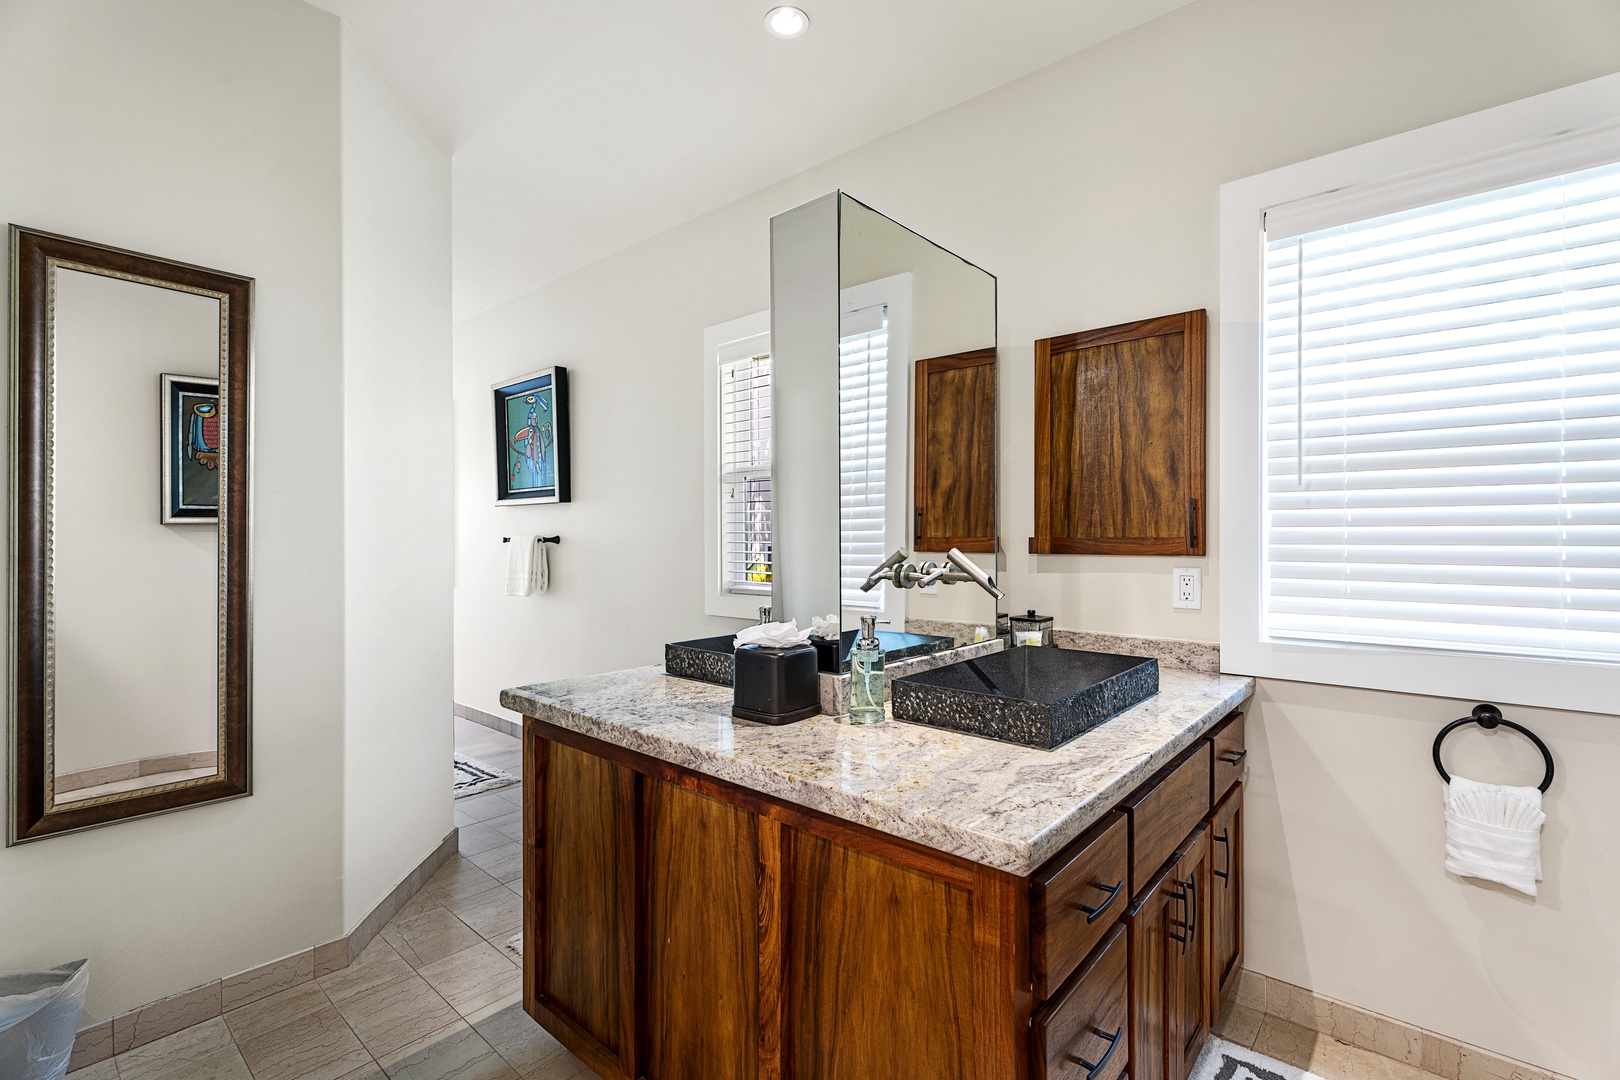 Kailua Kona Vacation Rentals, Ali'i Point #7 - Primary Bathroom features a soaking tub, walk-in shower, and two sinks